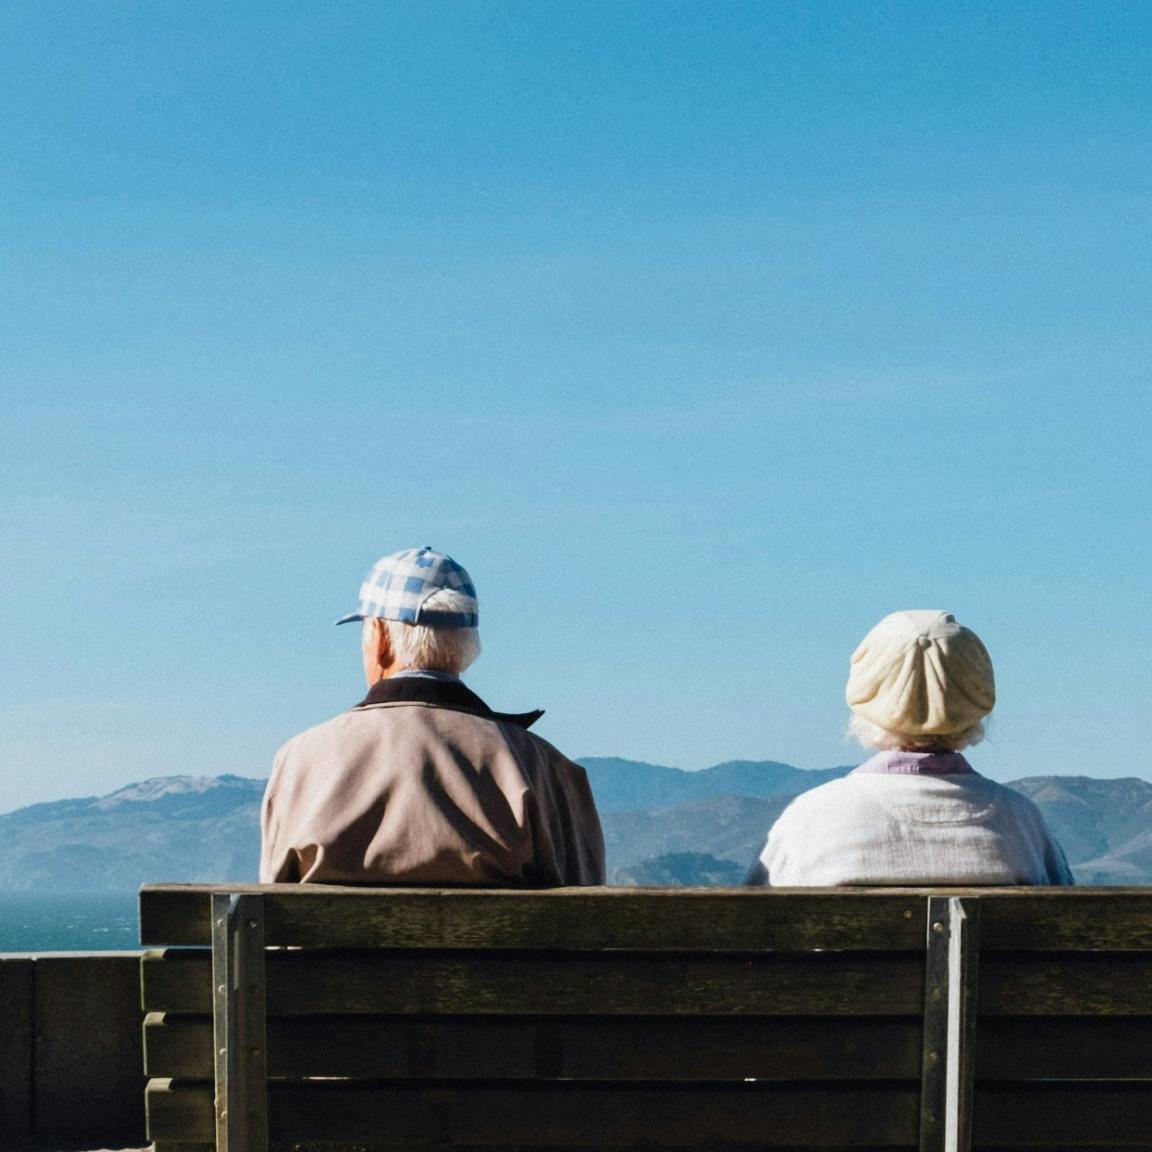 Photo of two older people sitting on a bench facing away from the camera.